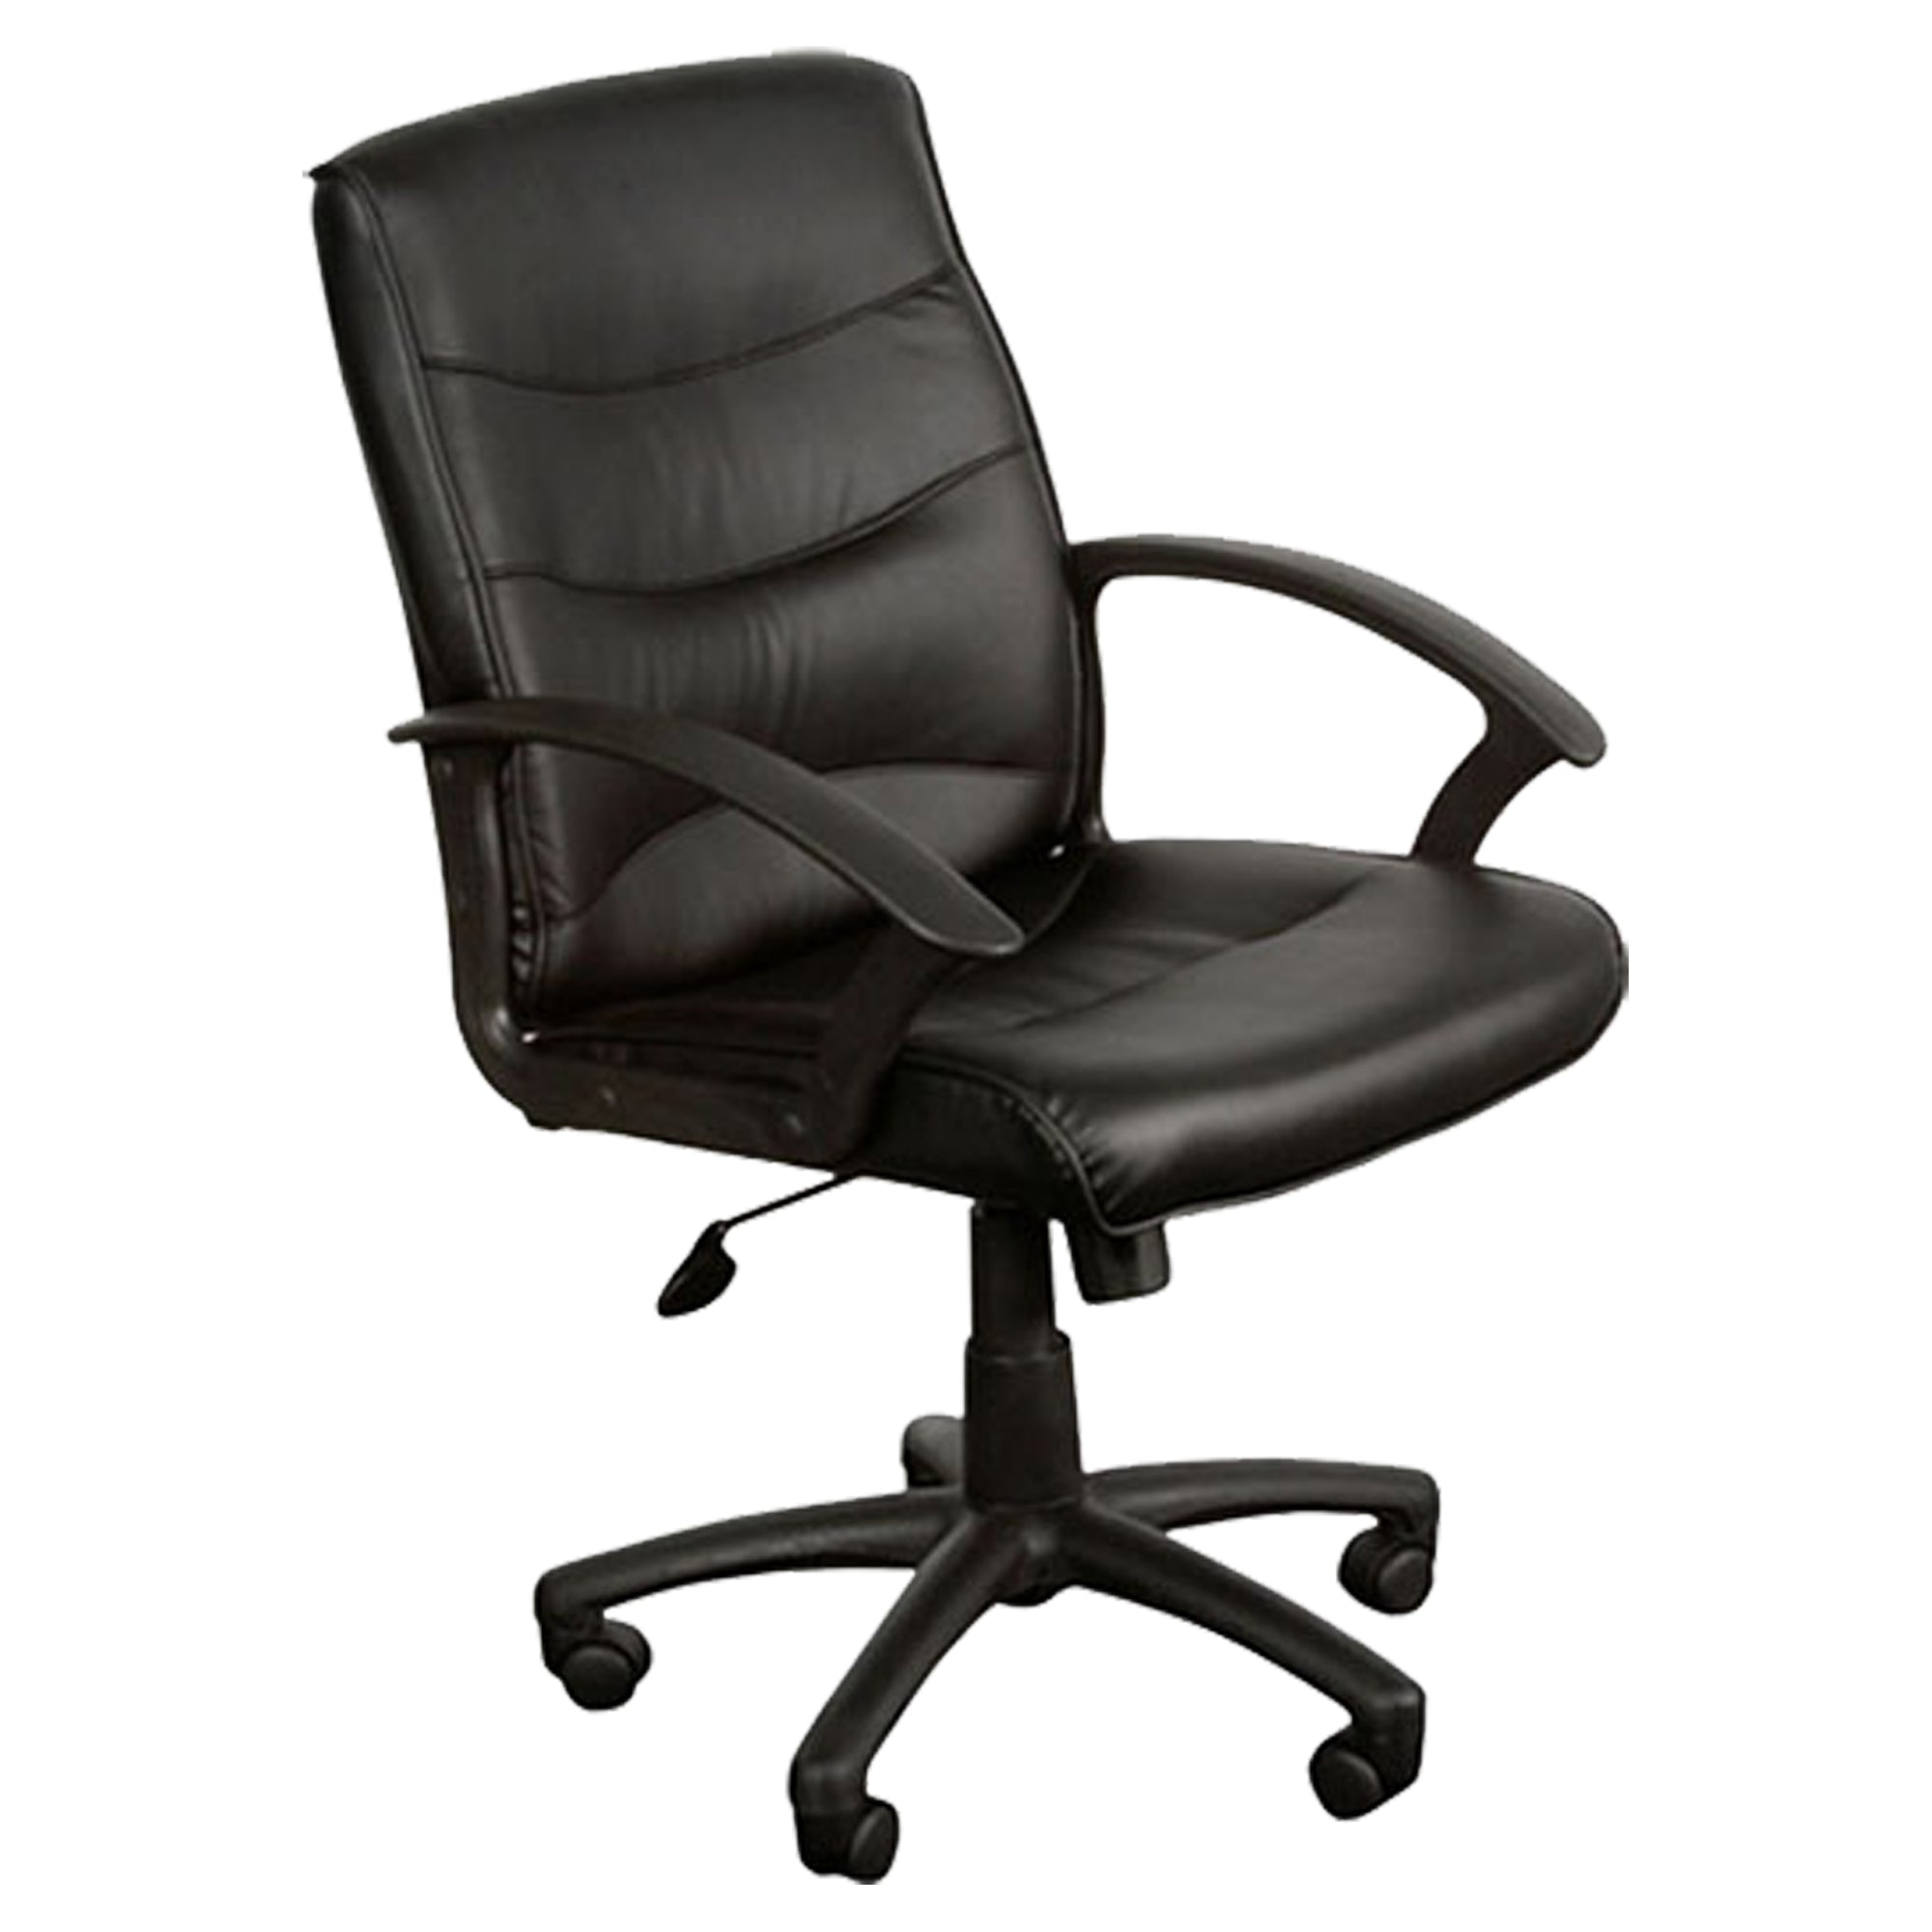 Star Executive Office Chair PU Leather Super Comfortable YS111